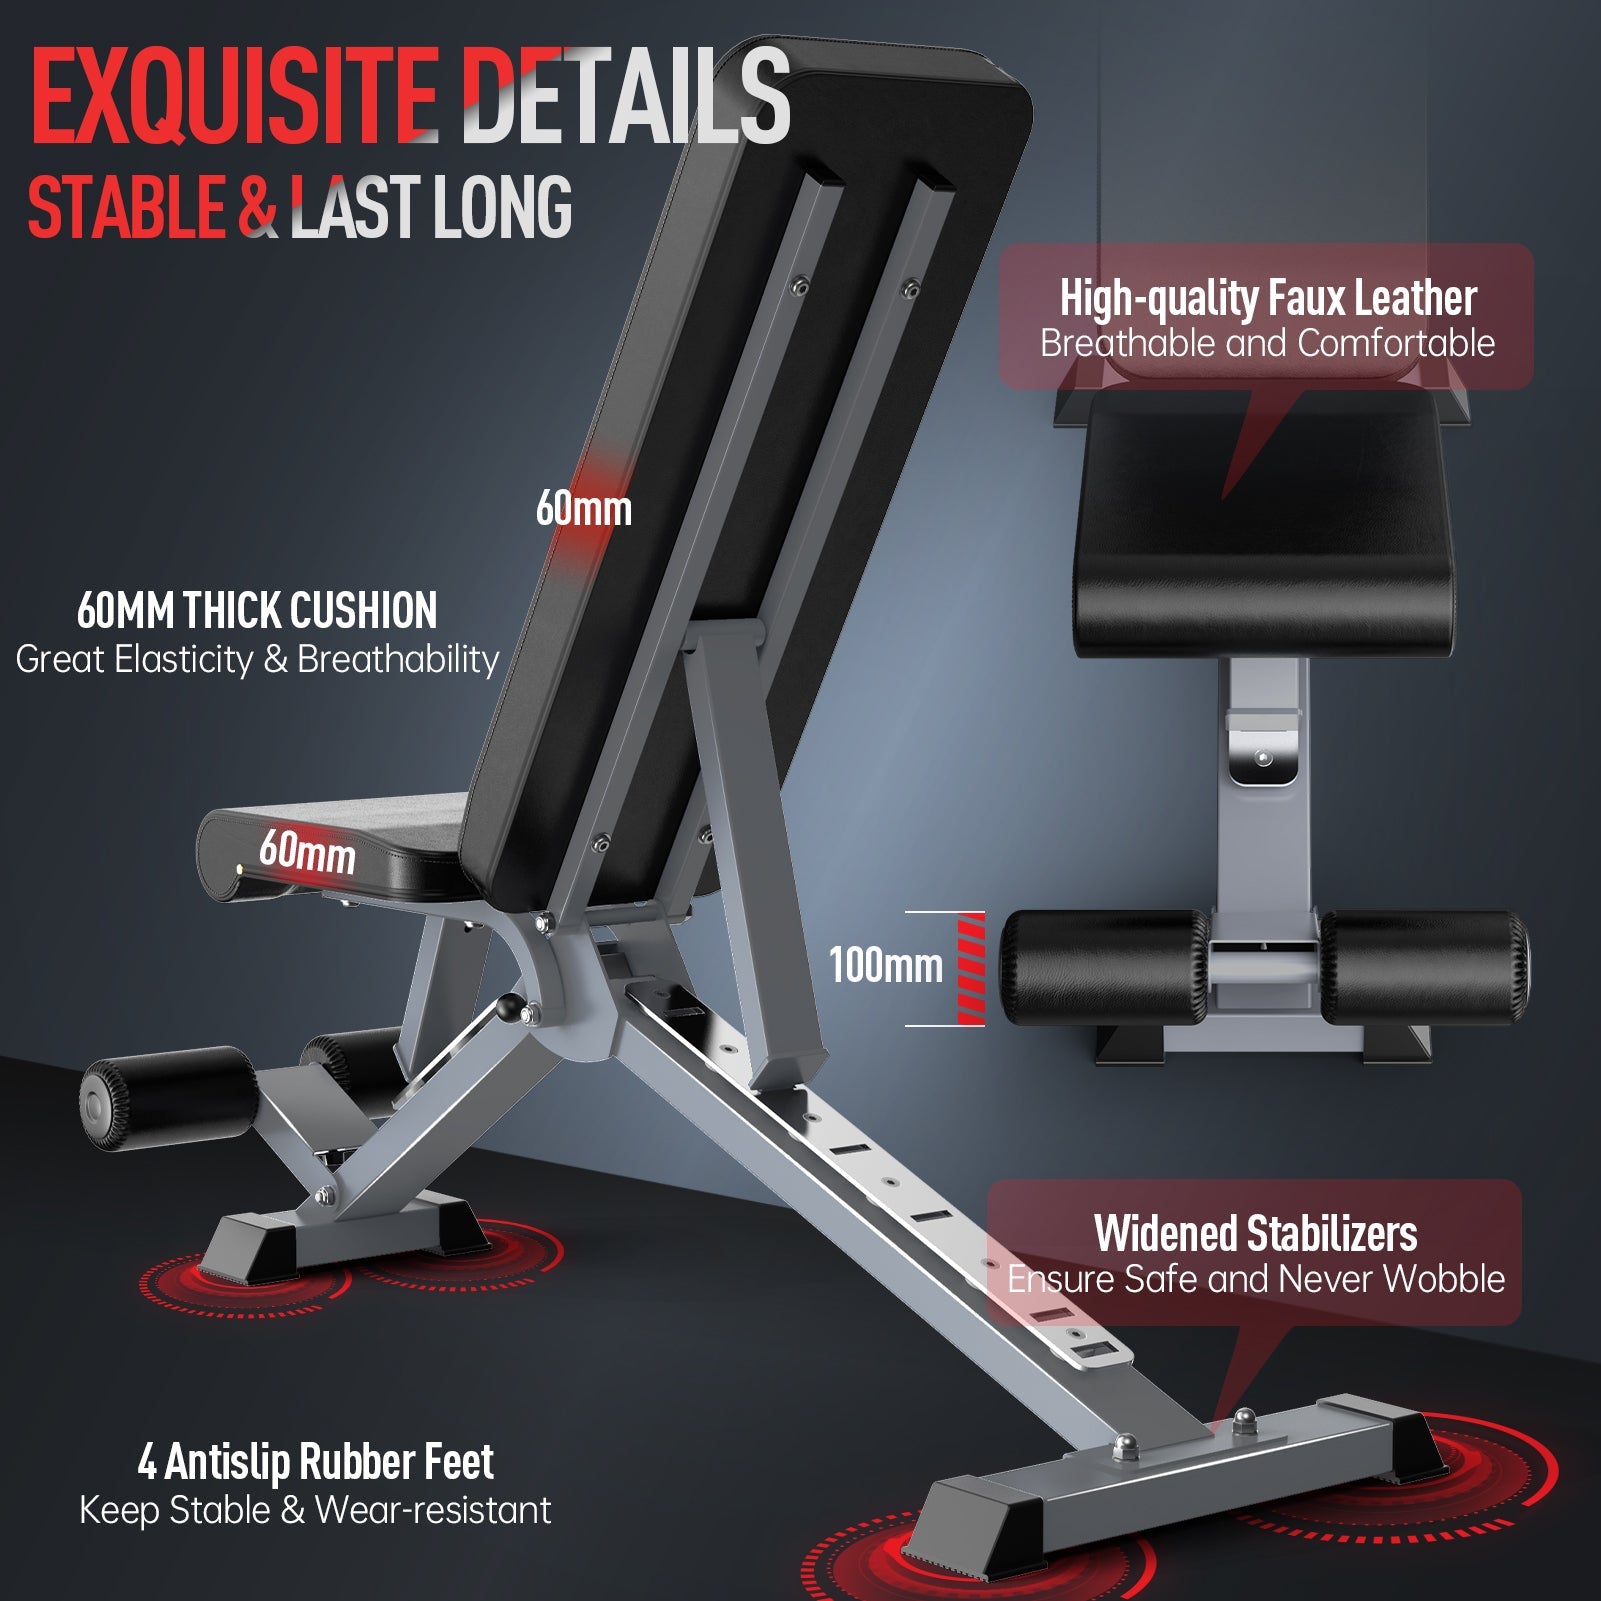 Upright Exercise Bench: for Strength Training